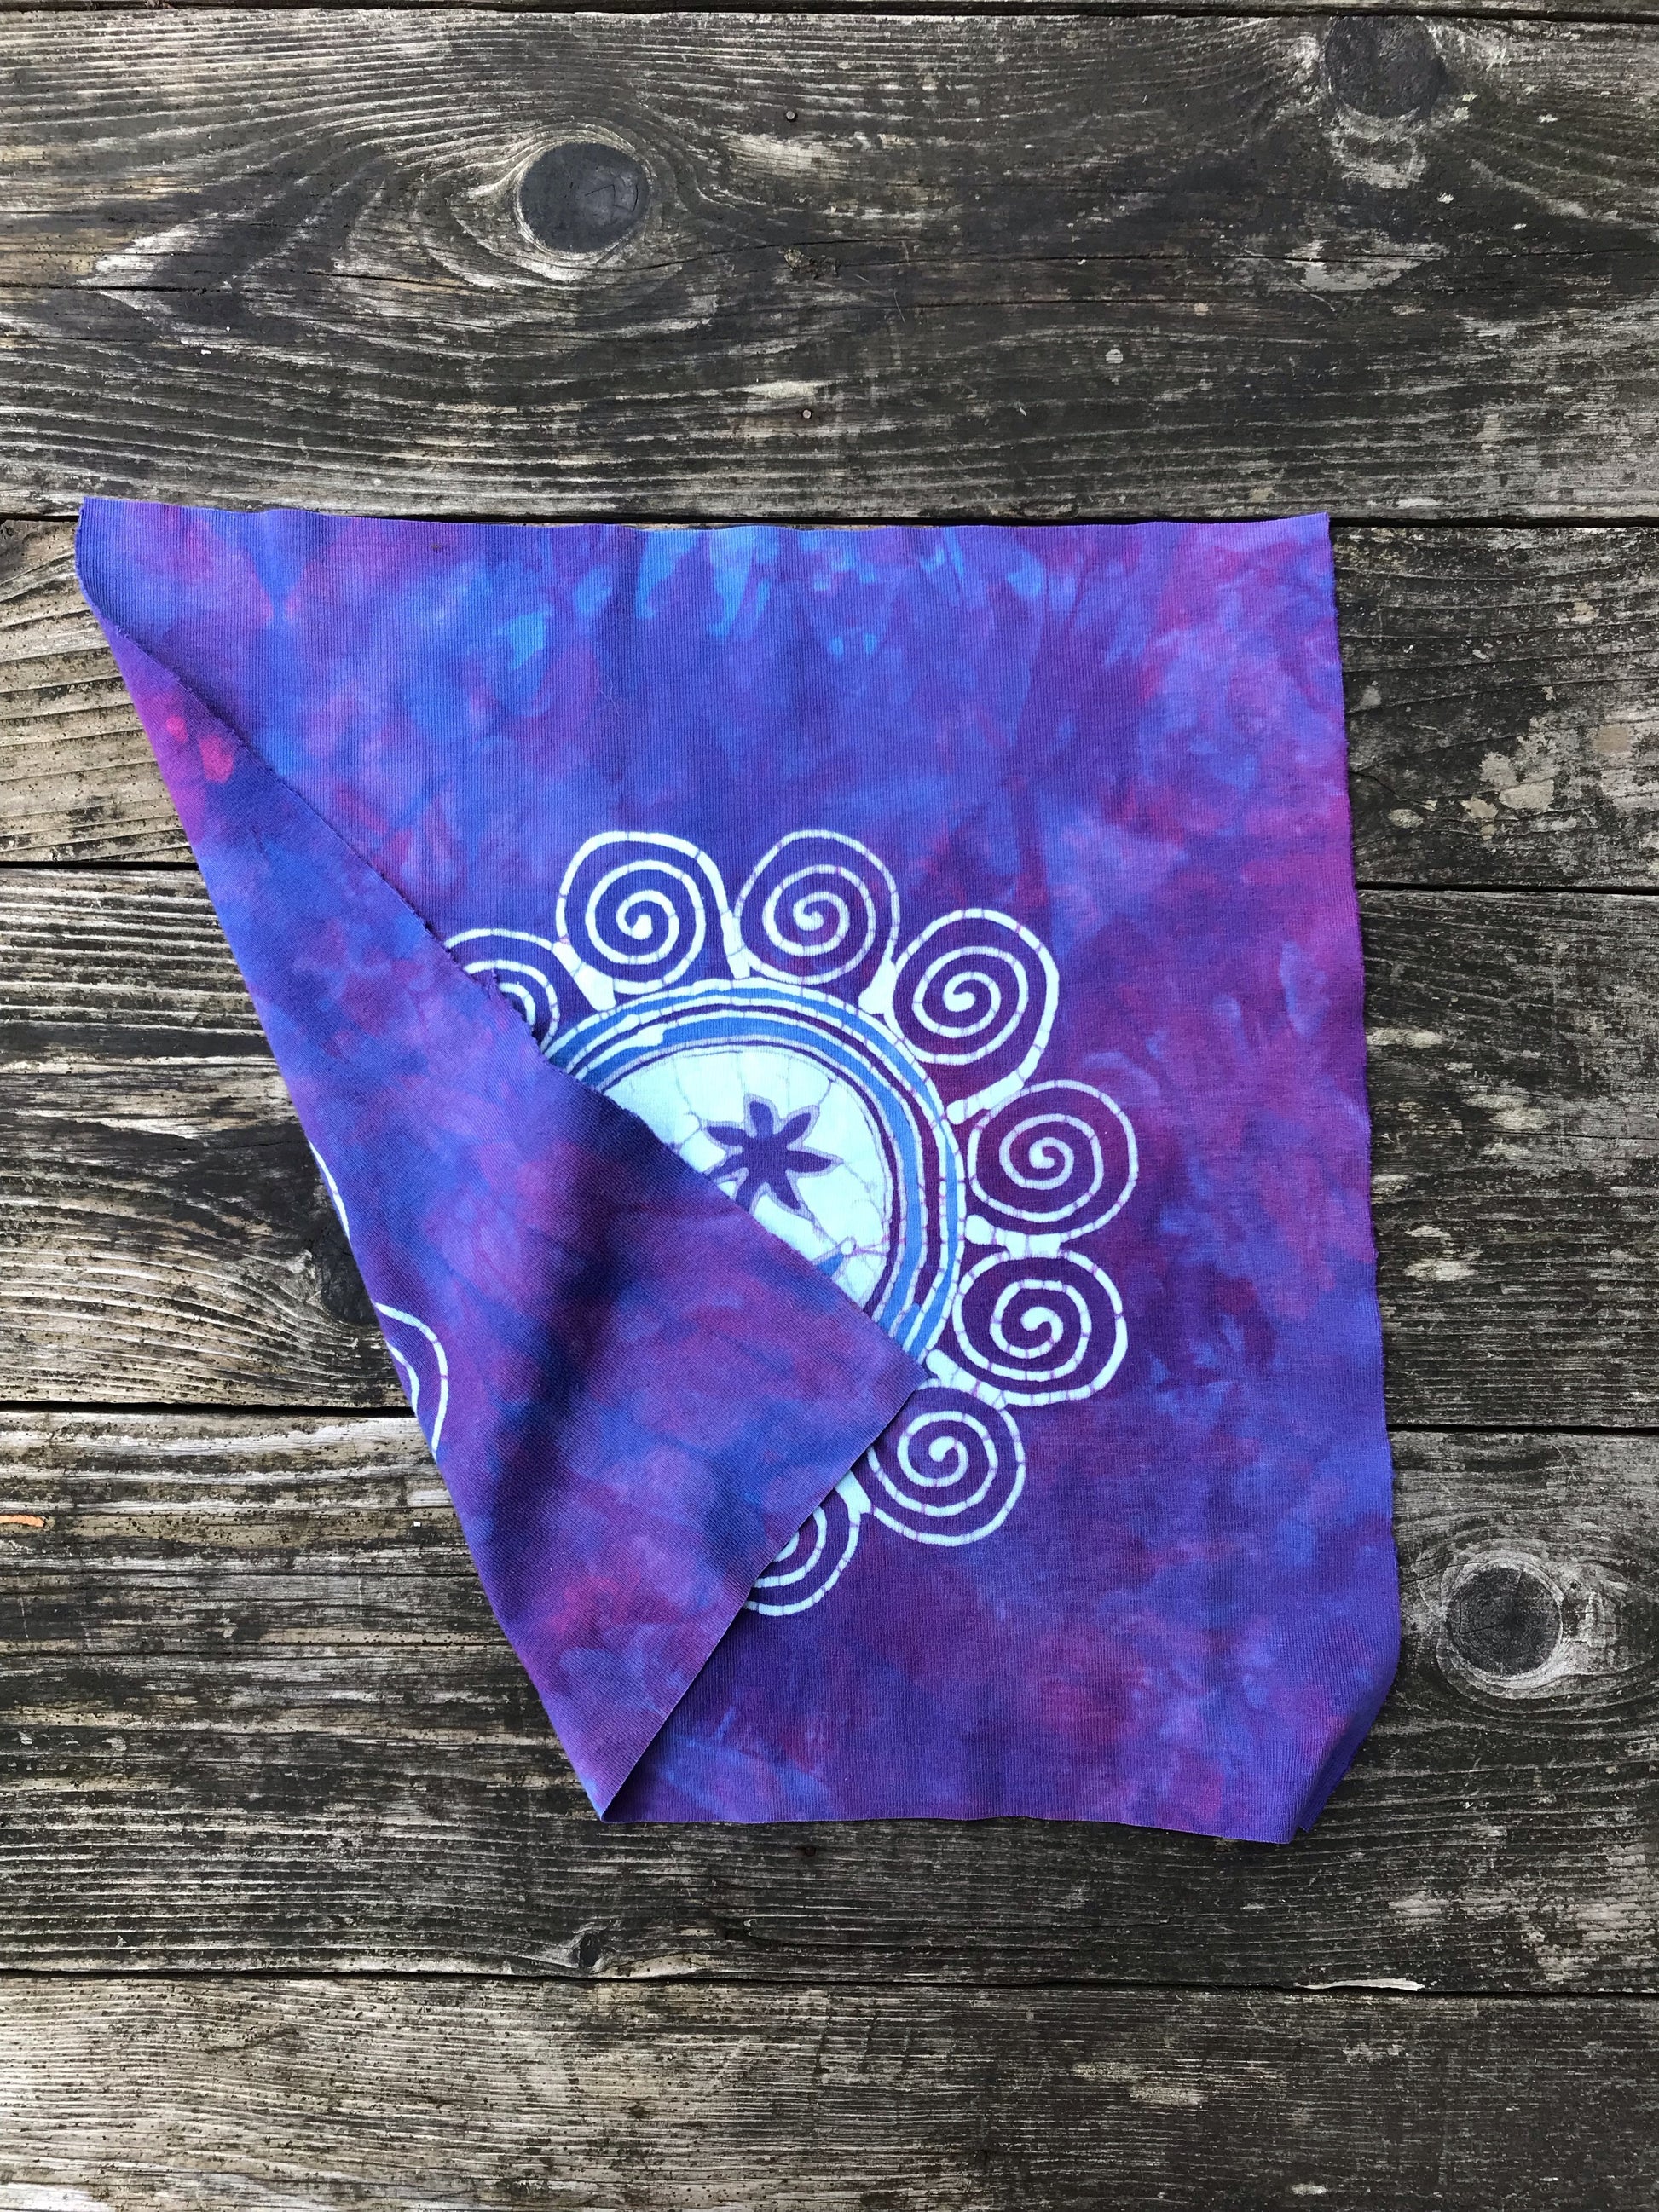 Hand Painted Batik Fabric Square - Moon Marble in Teal and Purple